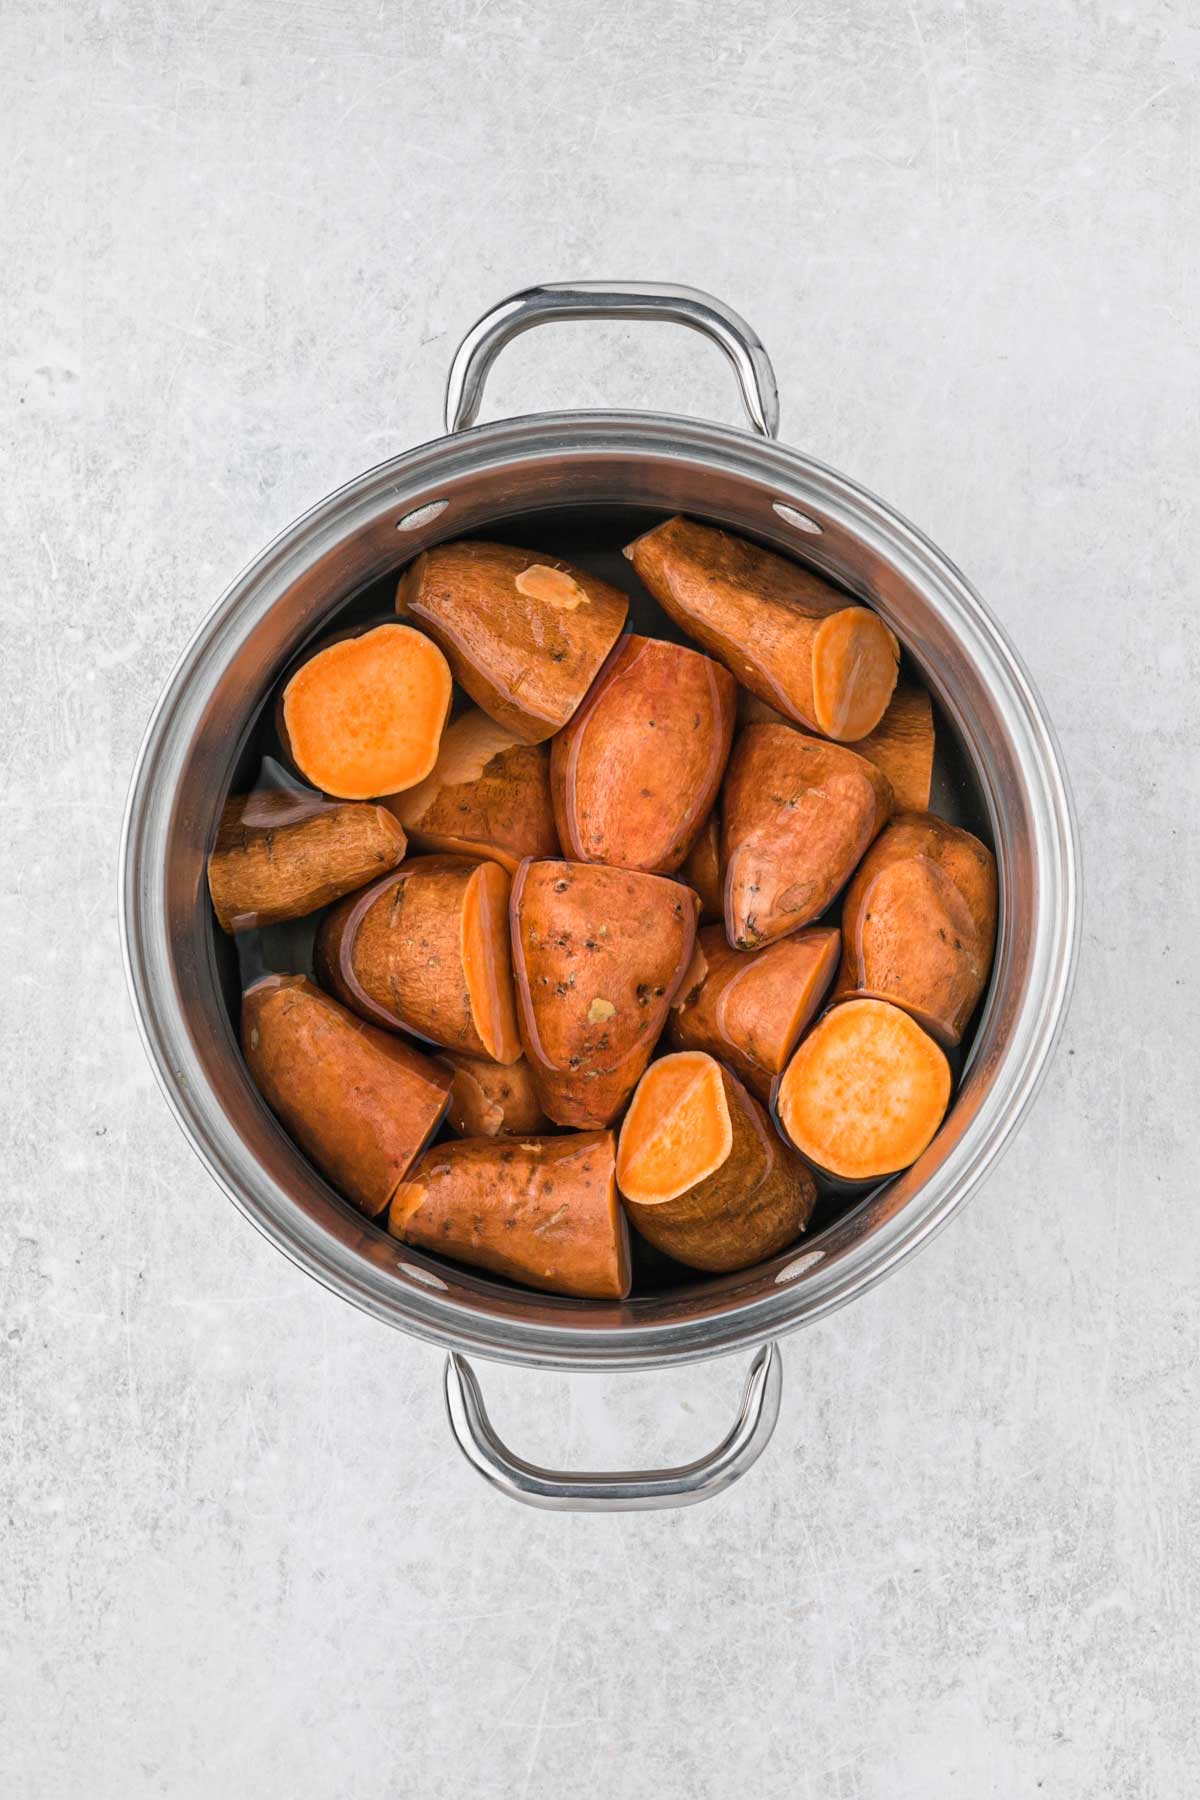 Sweet potatoes in a pot with water.